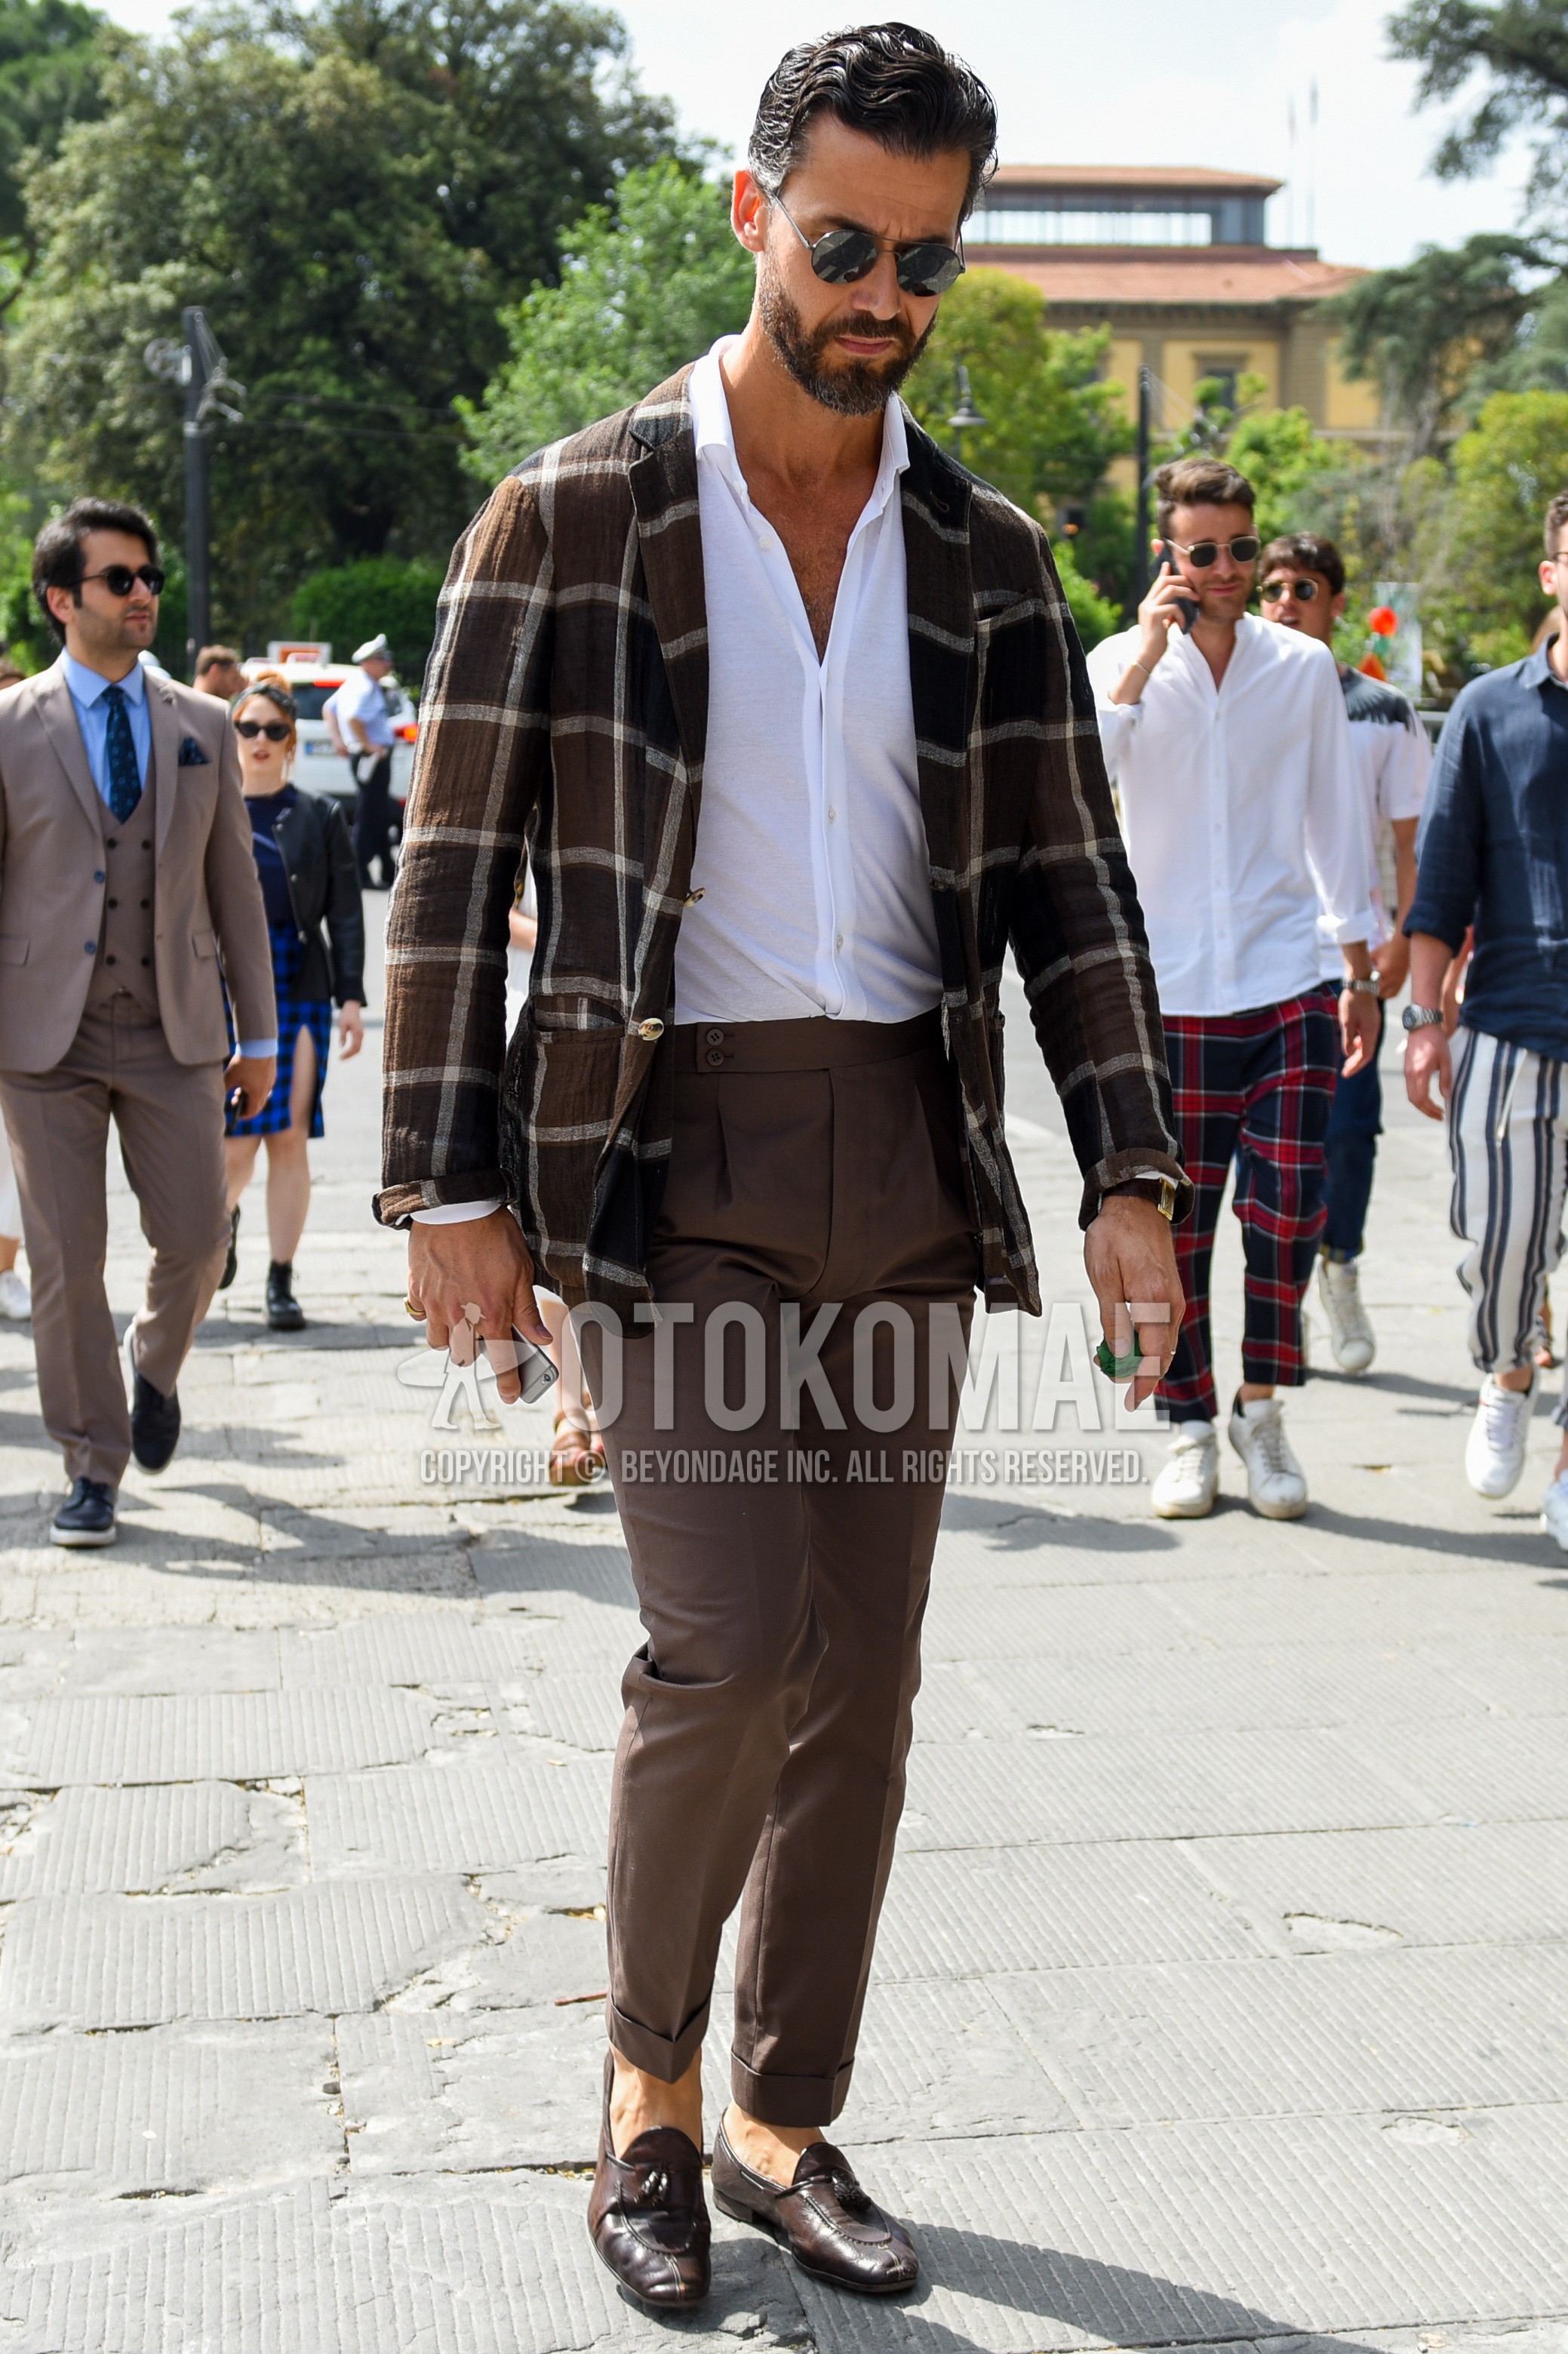 Men's spring summer autumn outfit with black plain sunglasses, brown check tailored jacket, white plain shirt, brown plain beltless pants, brown tassel loafers leather shoes.